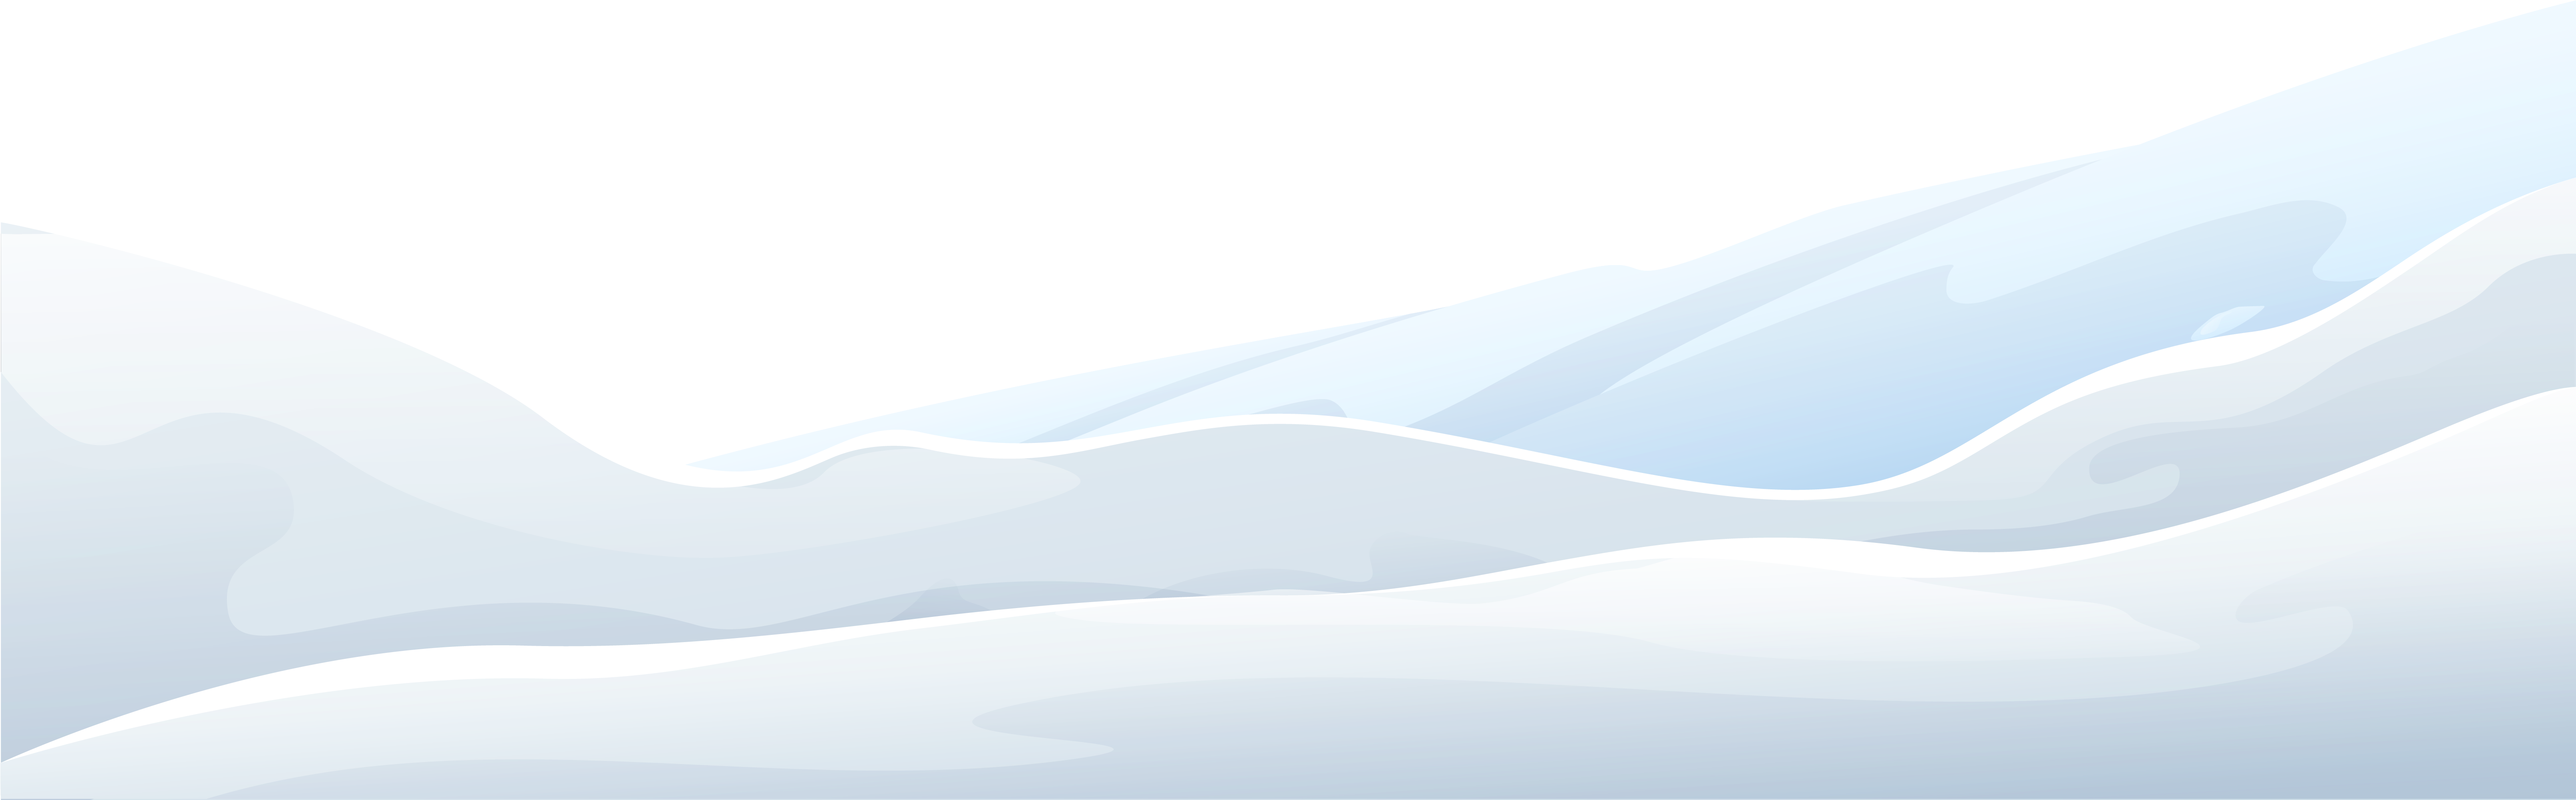 Snow Winter Clipart Image Snow On Ground Png Free Transparent PNG